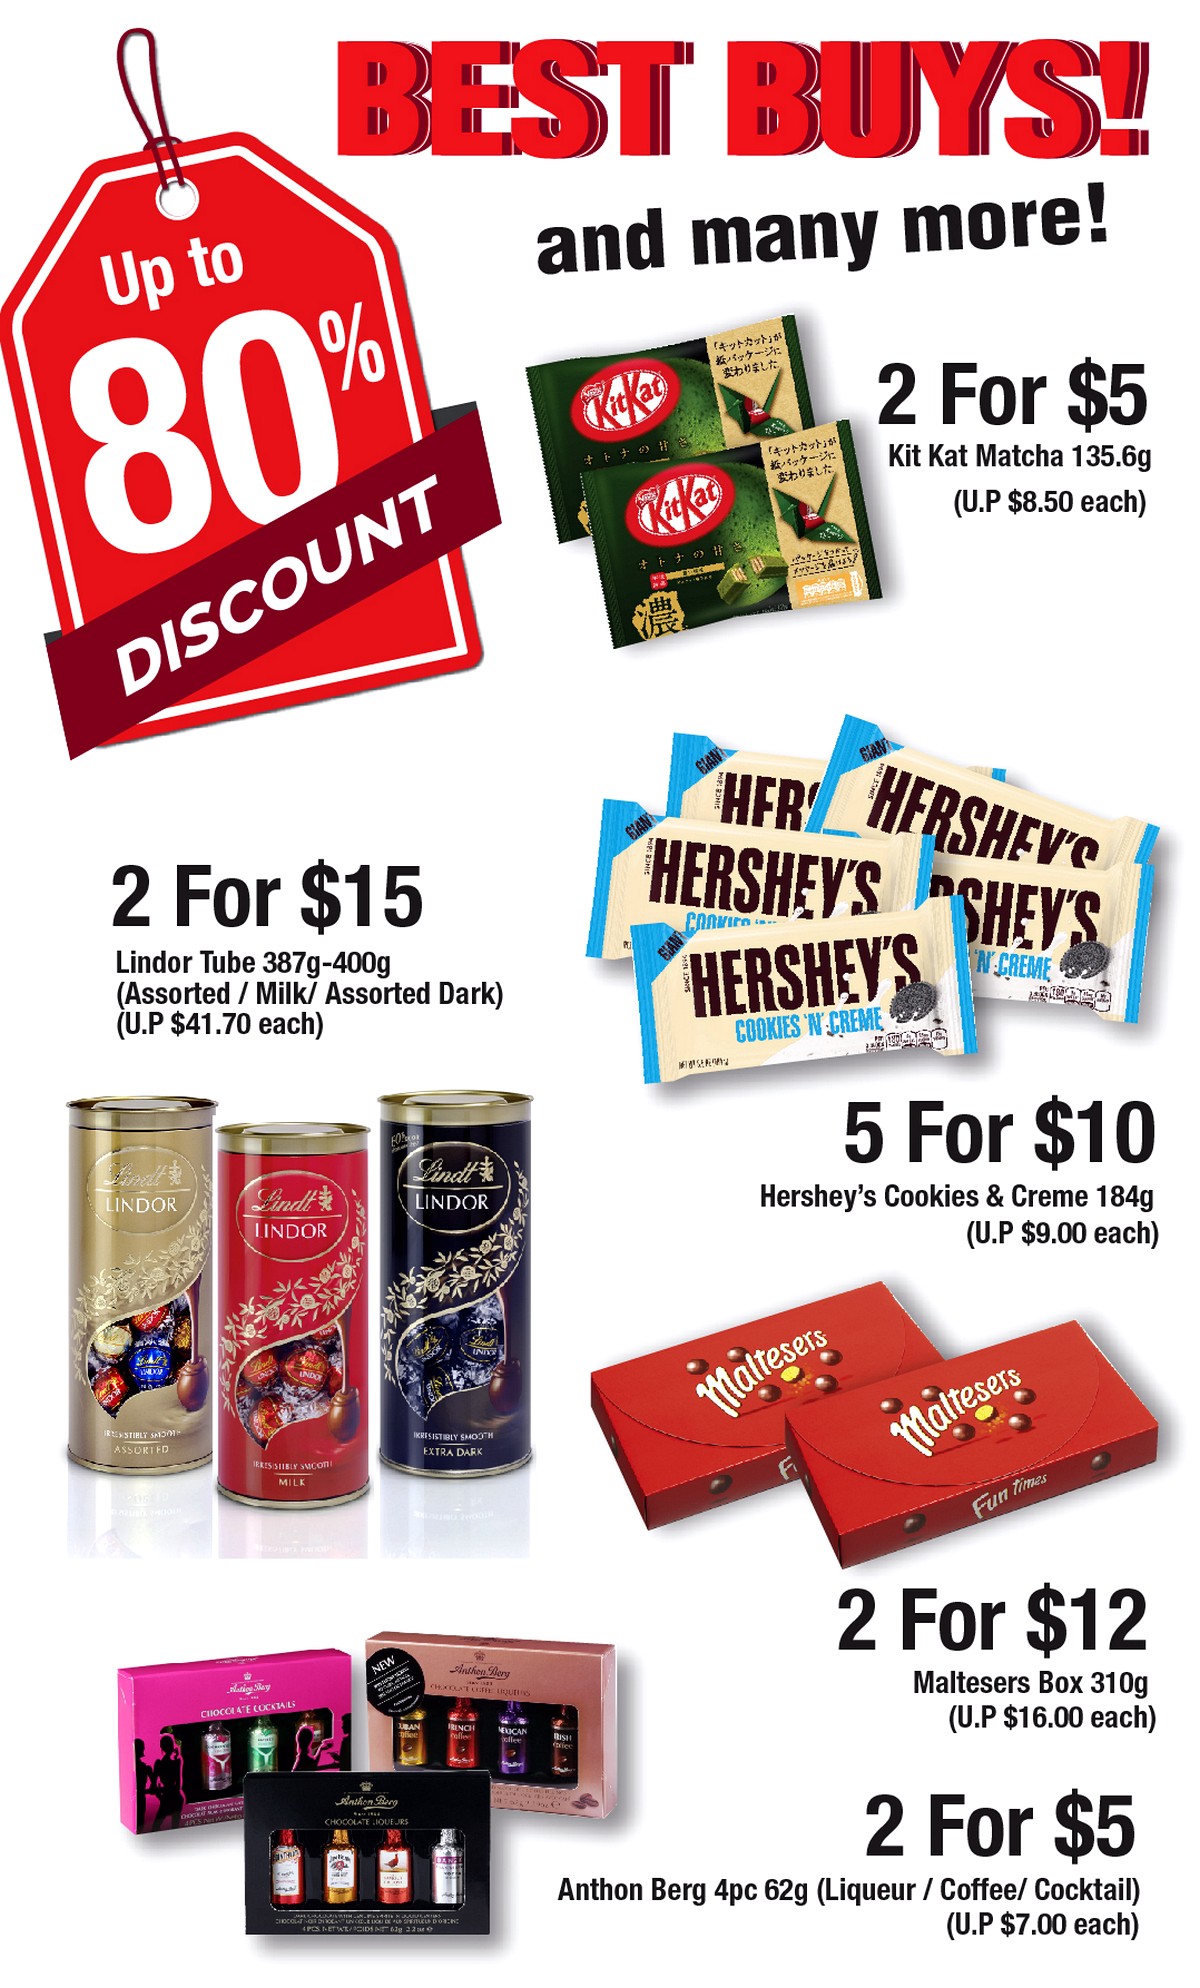 Picture3 24 Jul-2 Aug 2020: Choc Spot Warehouse Sale! Up to 80% off Chocolates, Sweets, Chips, Biscuits!